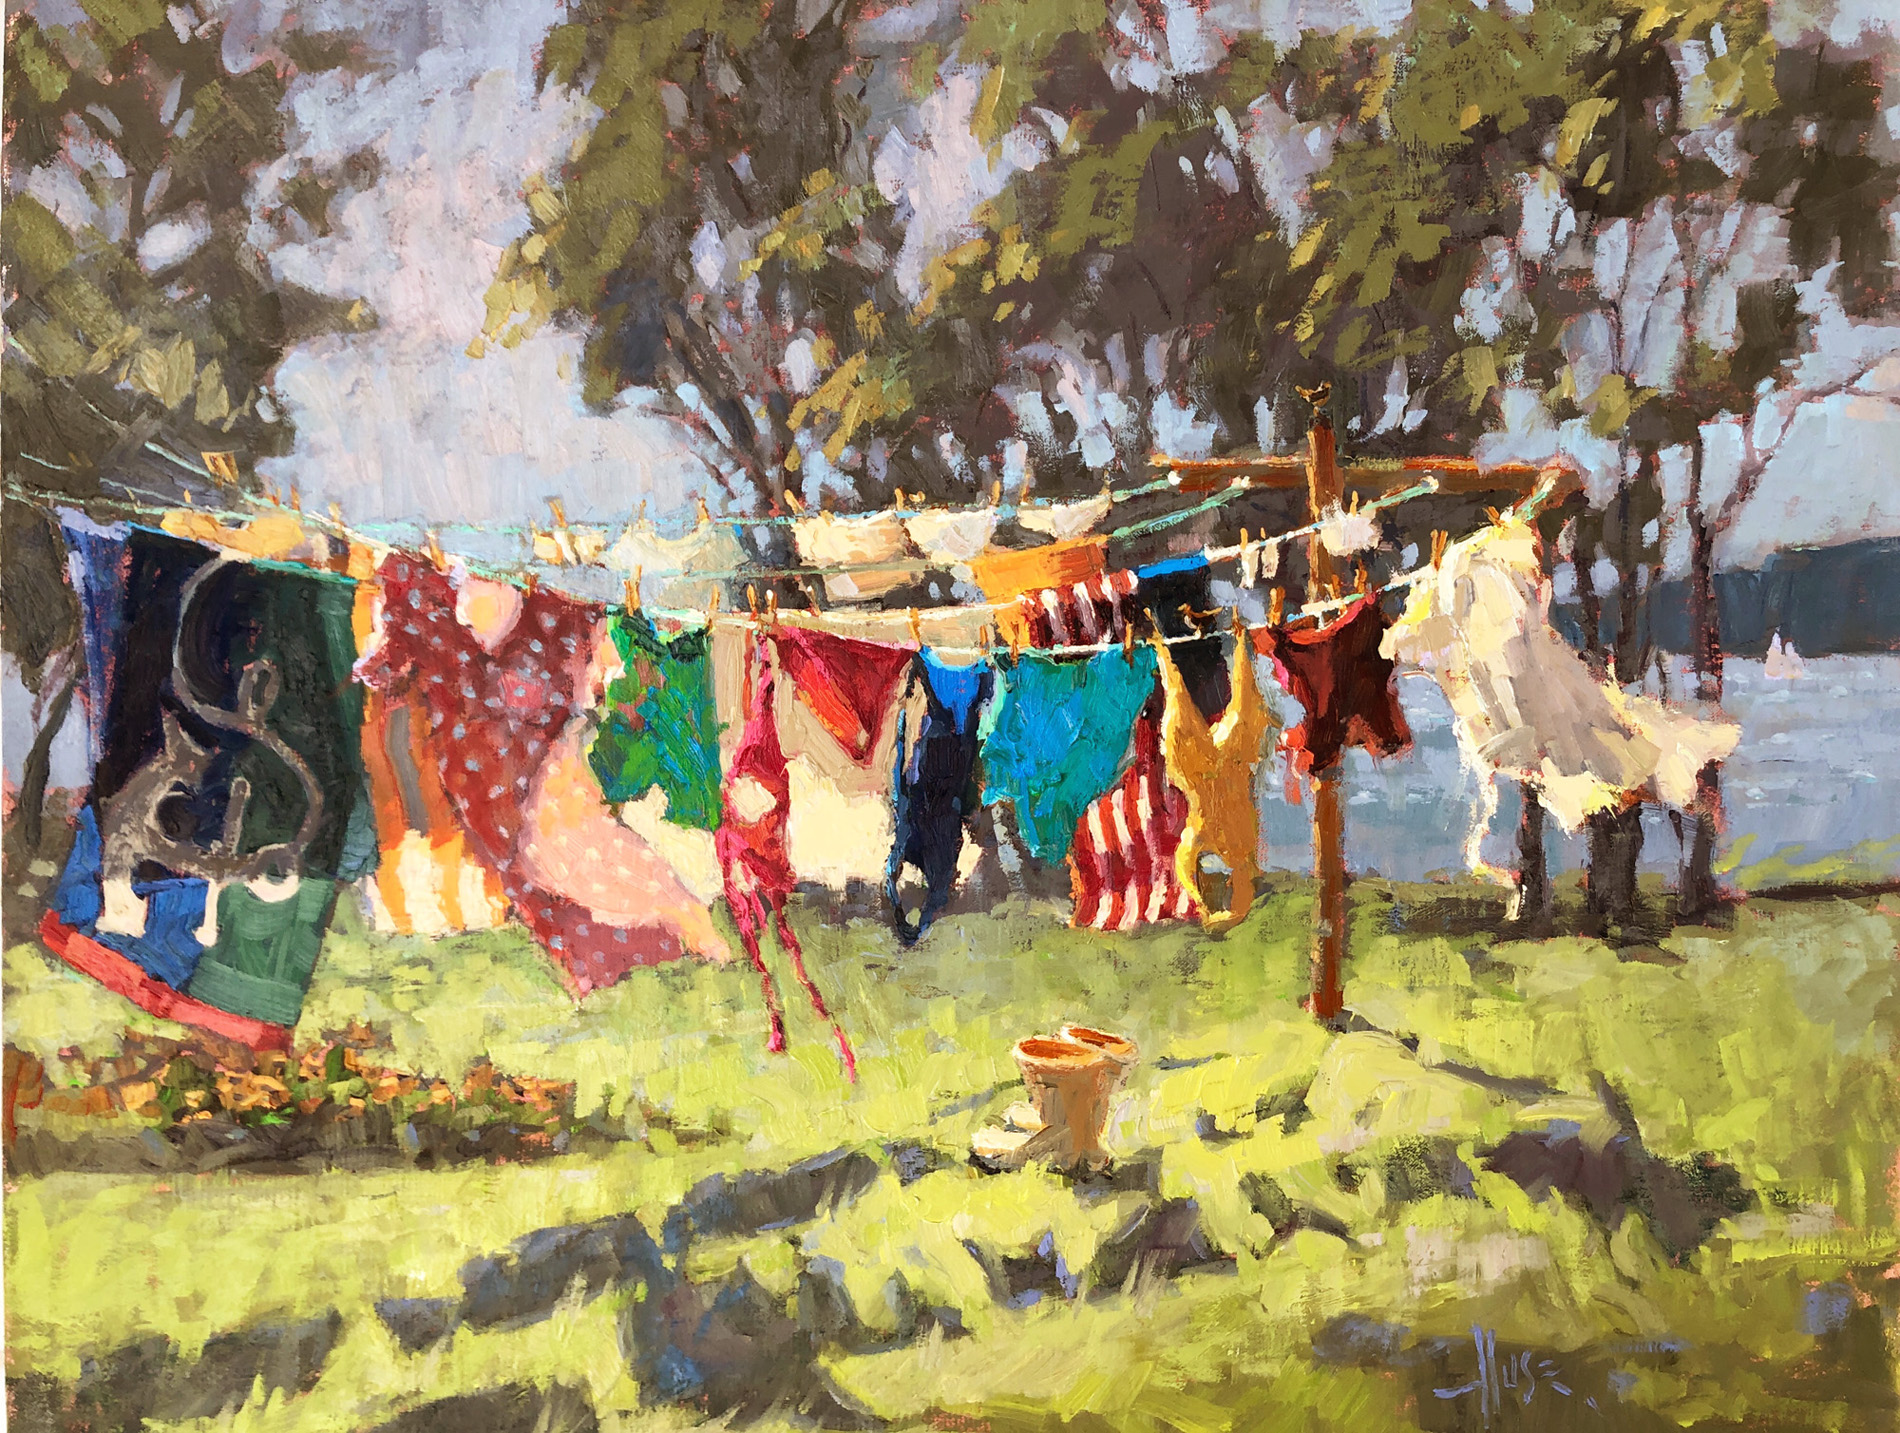 Debra Huse, “Suits ’n’ Boots,” 2019, oil, 16 x 20 in., Private collection, Plein air